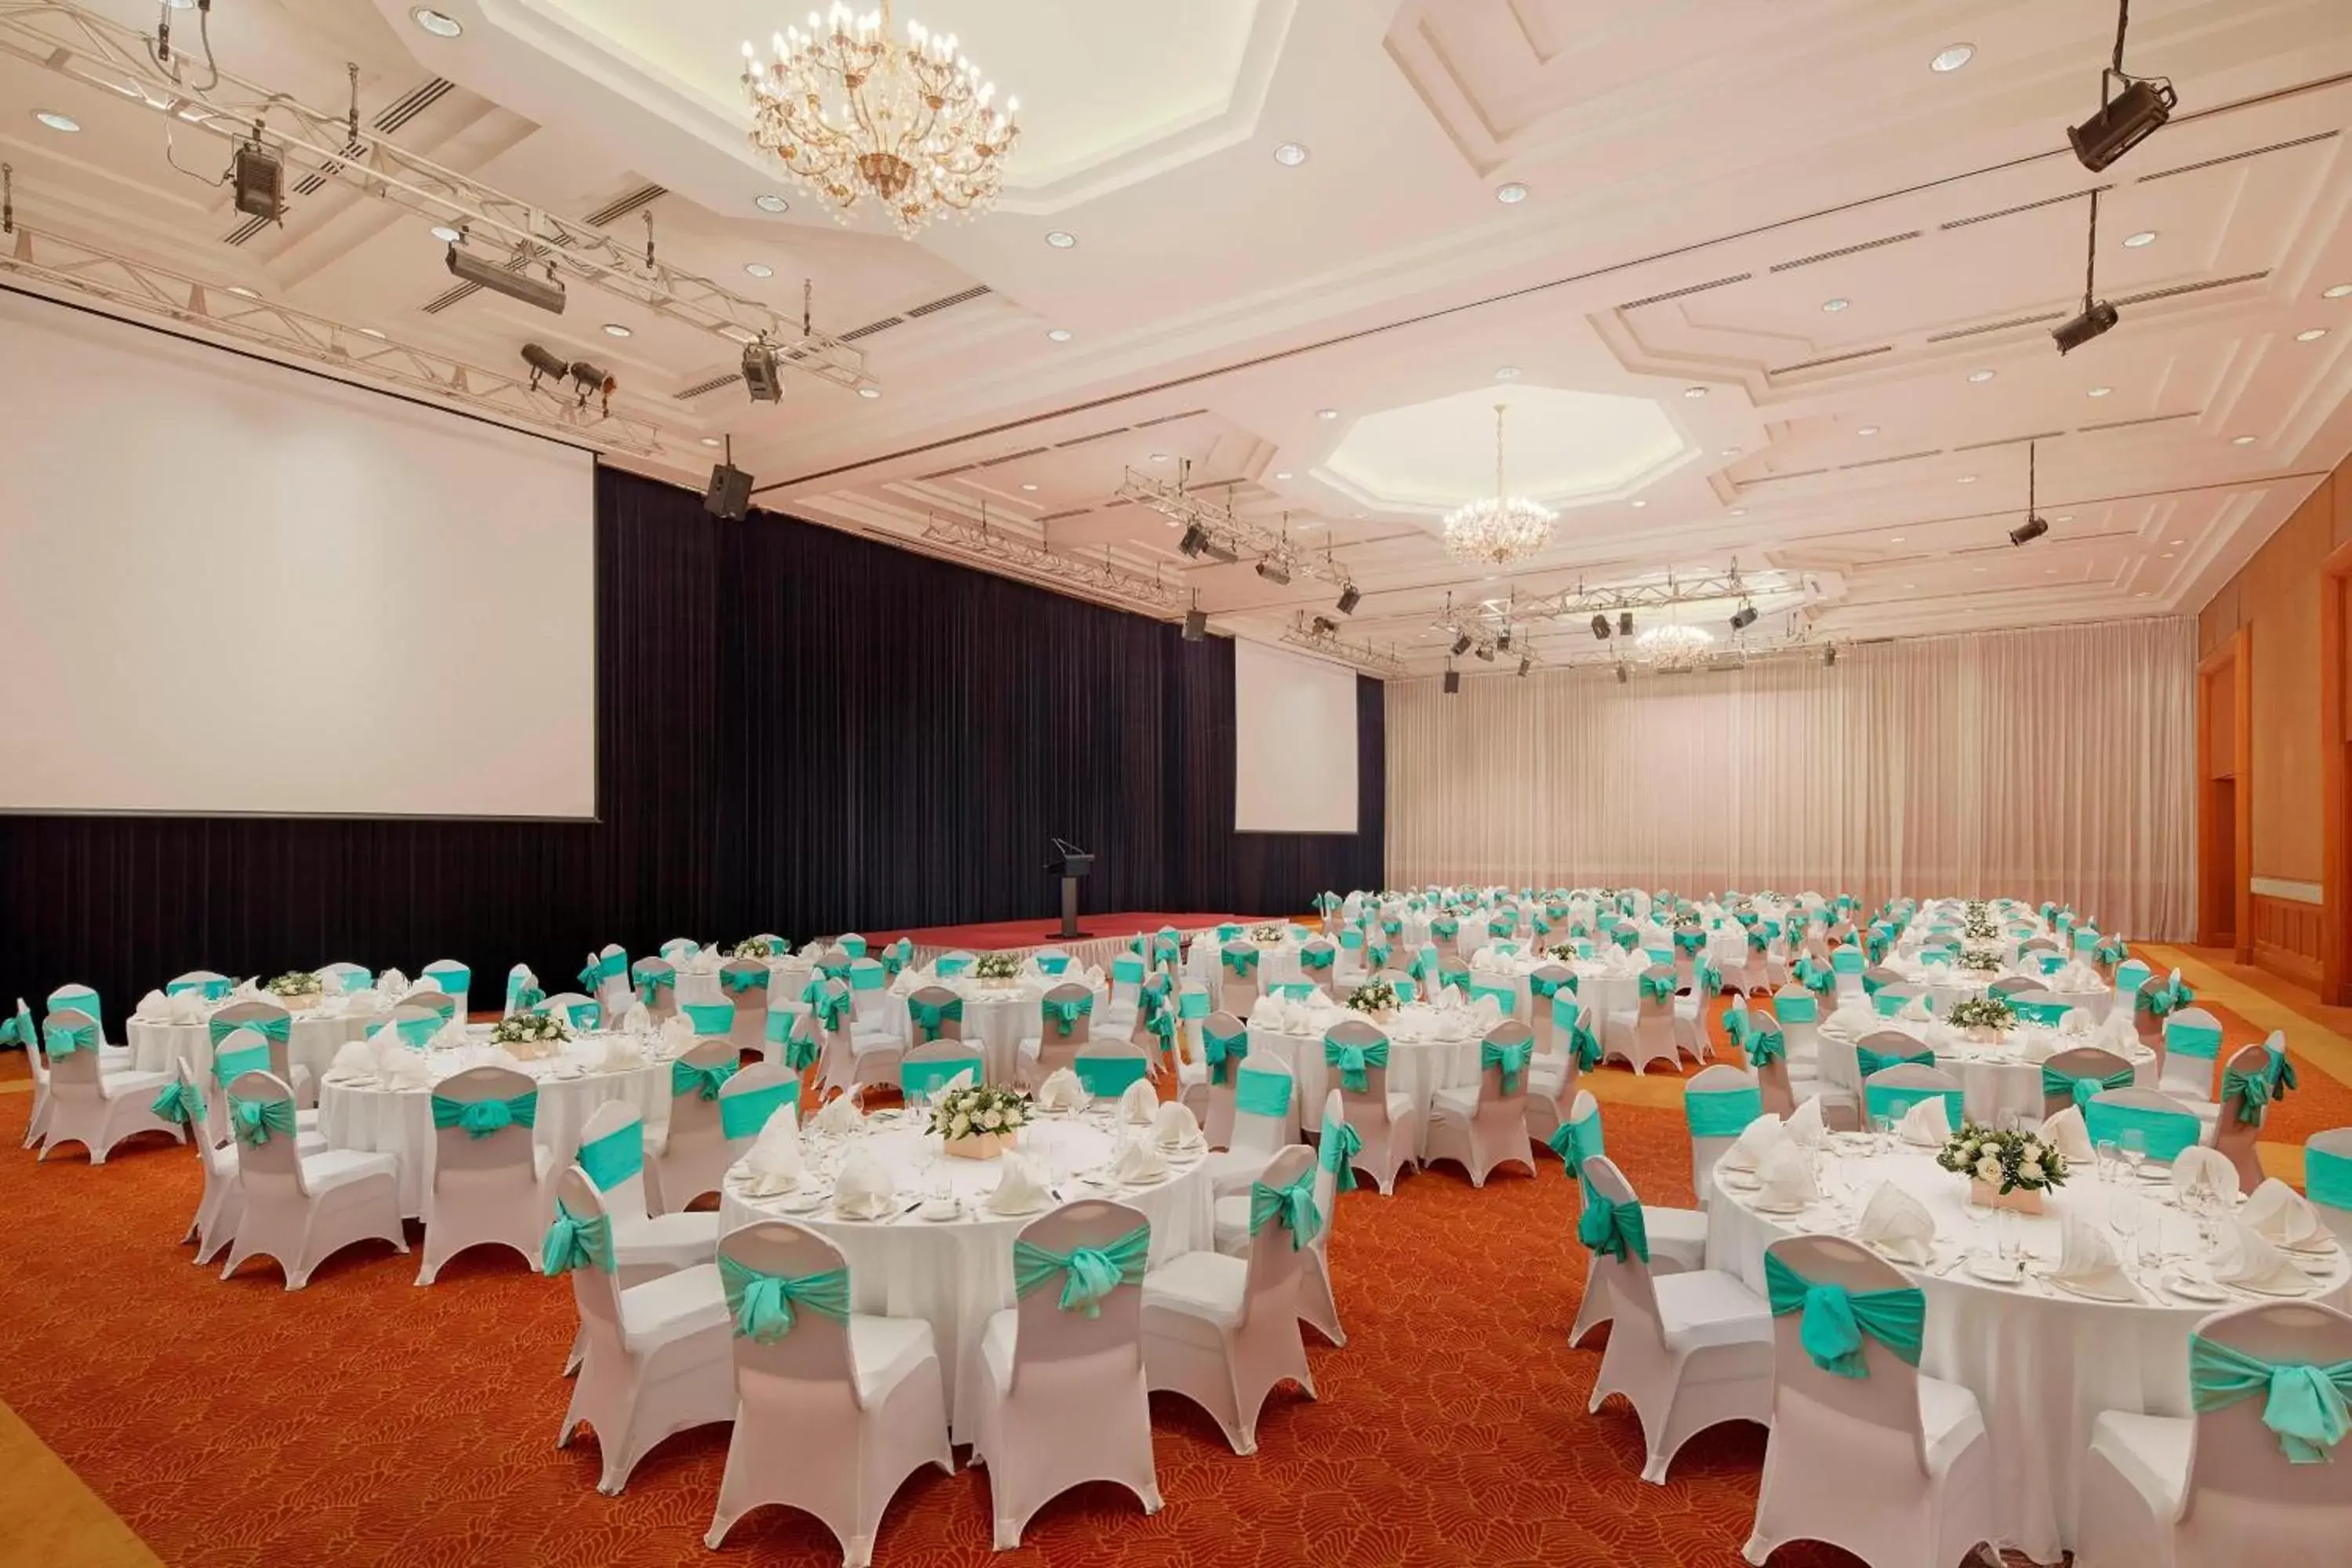 Meeting/conference room, Banquet Facilities in Sheraton Hanoi Hotel